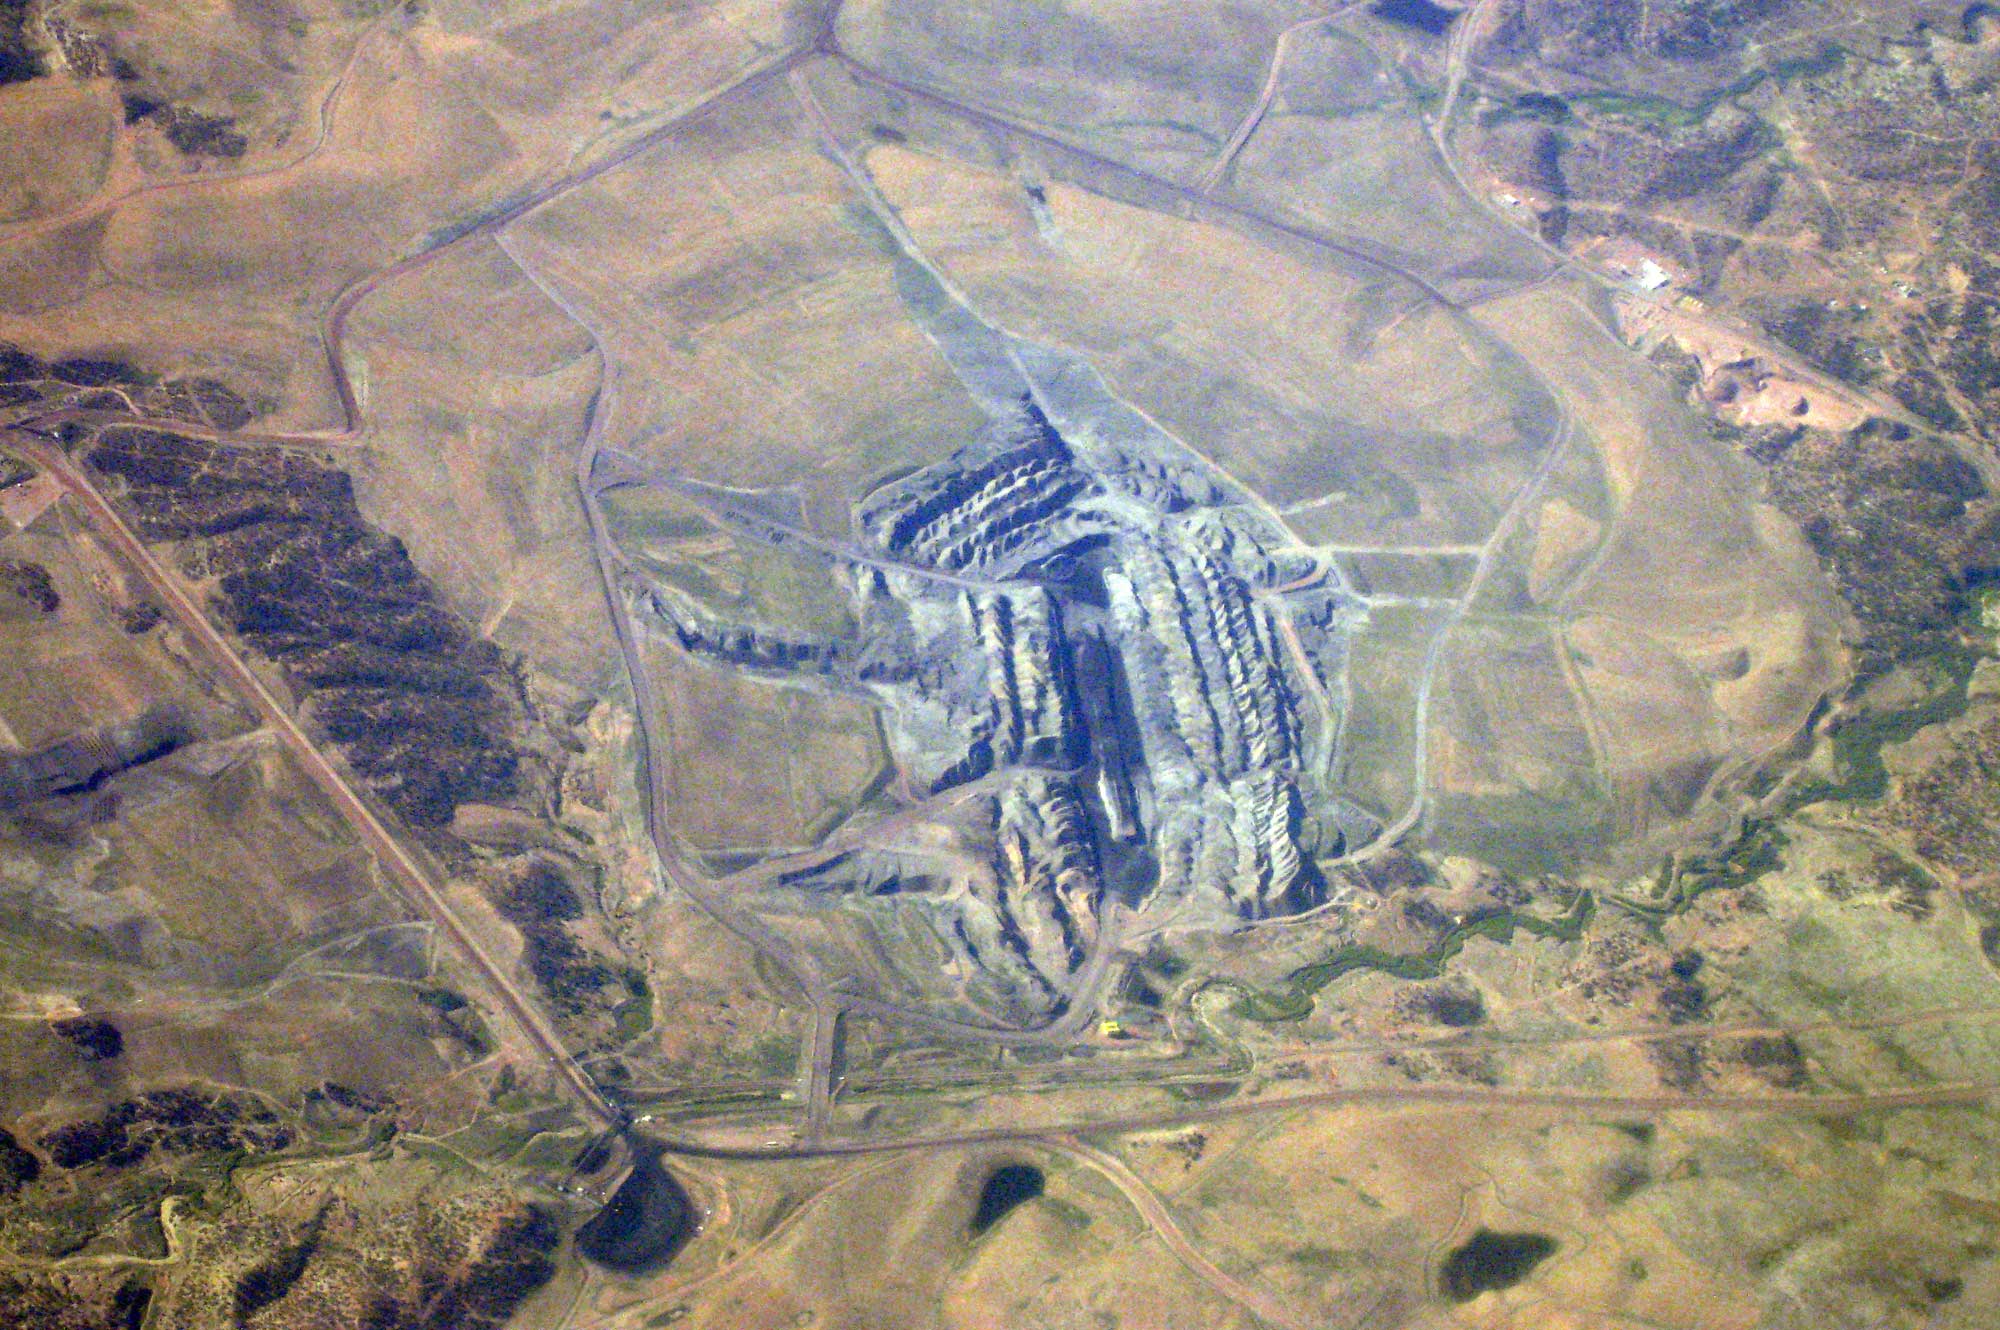 Aerial photo of the Kayenta Coal Mine, a strip mine in Arizona. The Mine looks like an oblong gray landform with a central dark gray region that has been dug into a light greenish-yellow landscape. A road encircles the mine.